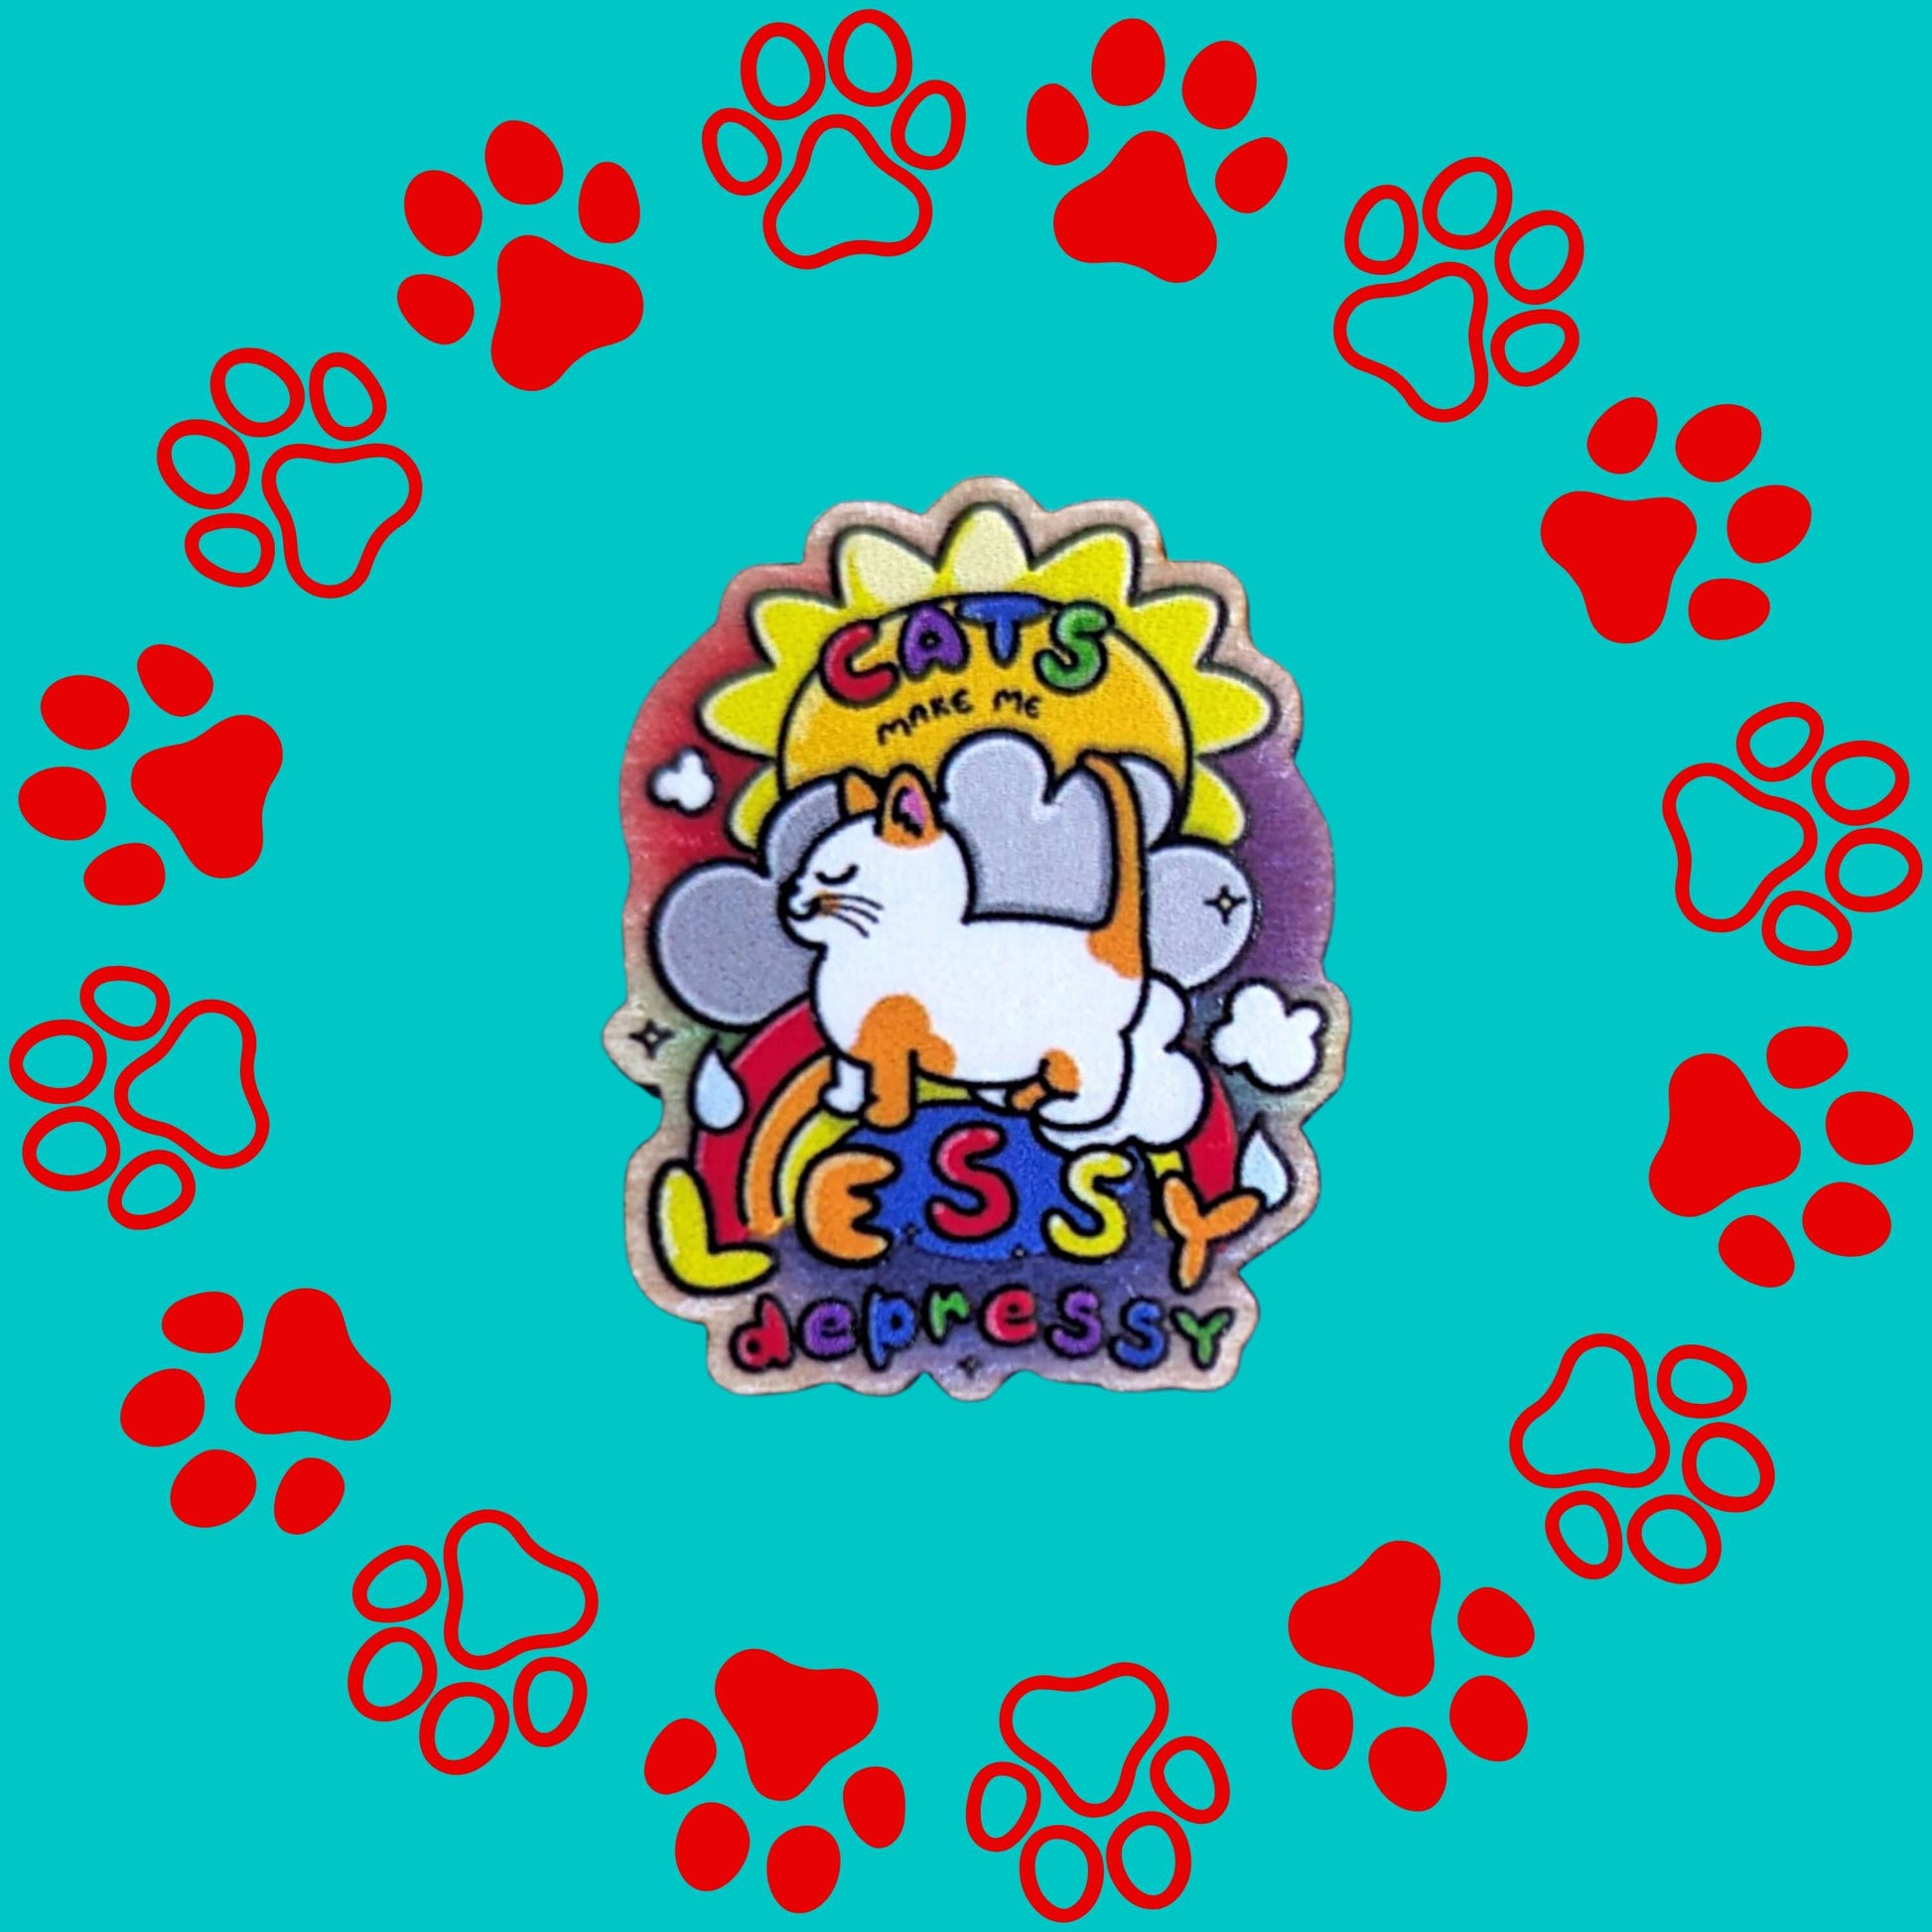 The Cats Make Me Lessy Depressy Wooden Pin Badge on a red and blue paw print background. The wooden pin features a smiling orange and white cat with a sunshine, raincloud and rainbow, in rainbow text across this reads 'cats make me lessy depressy'. Hand drawn design to raise awareness for mental health and depression.